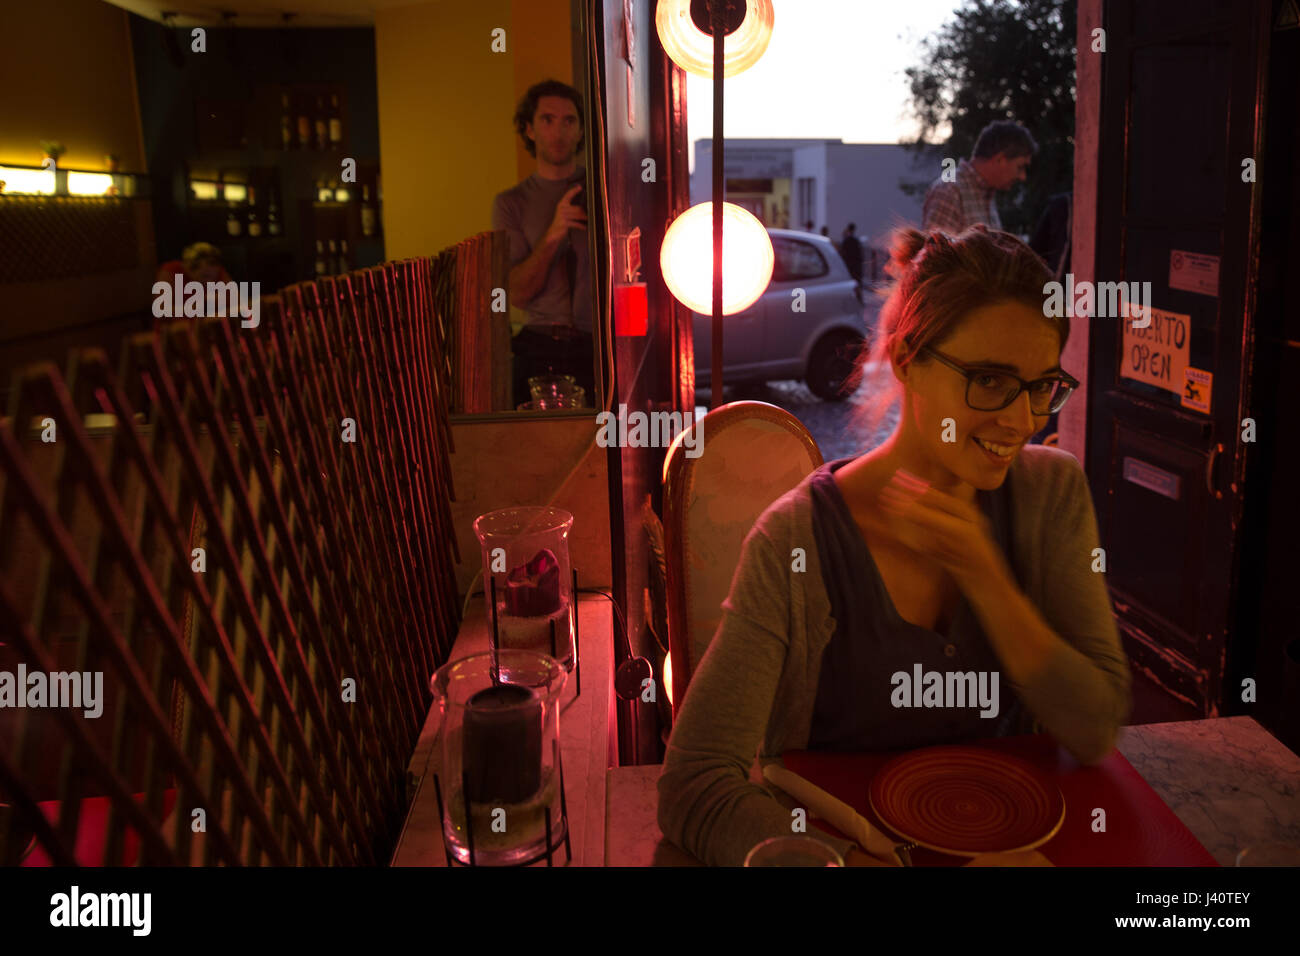 Young woman sitting in a restaurant, Sao Tome, Sao Tome and Principe, Africa Stock Photo